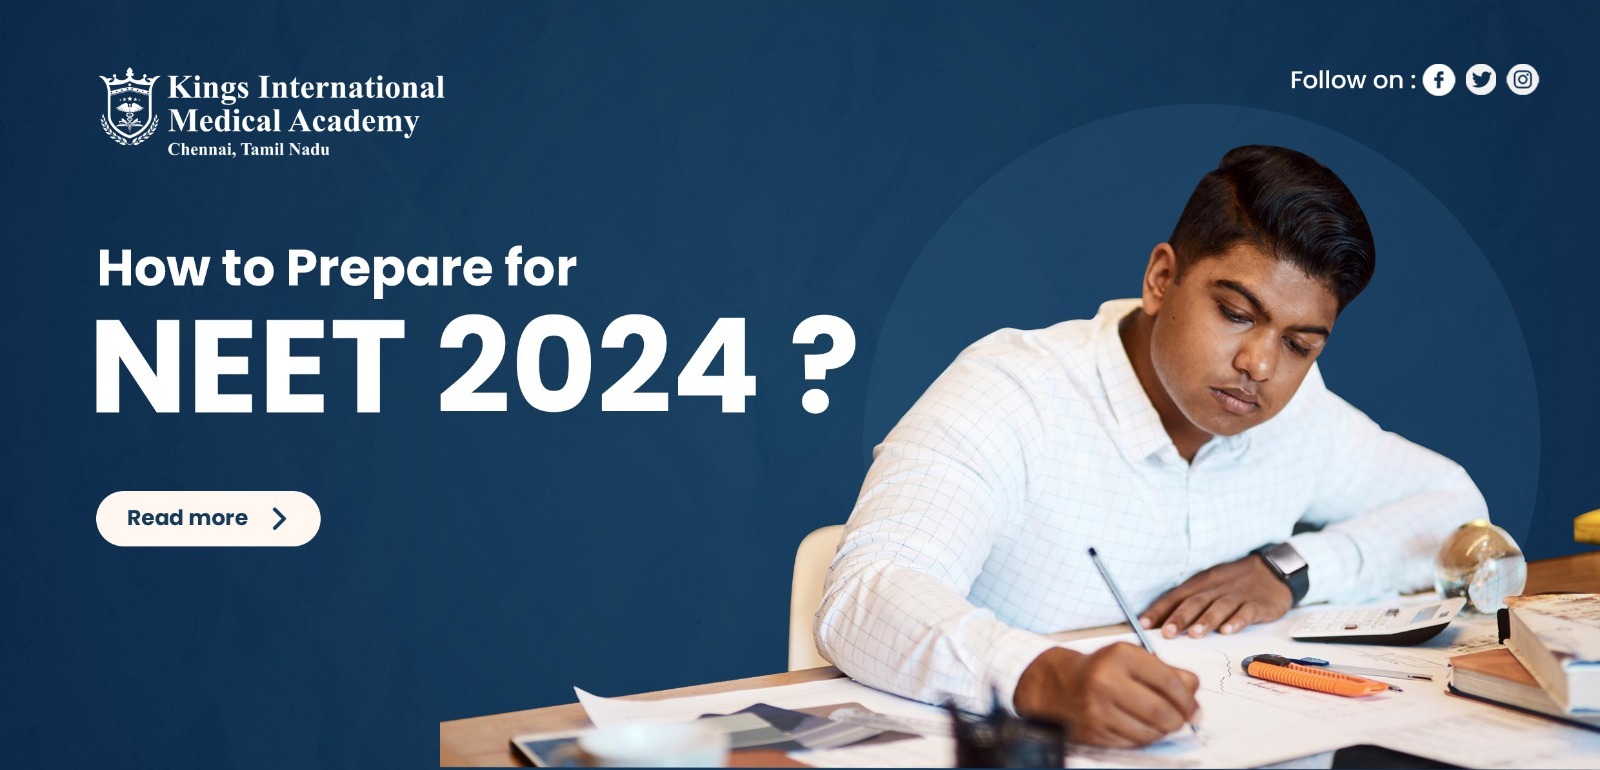 How to Prepare for NEET 2024?